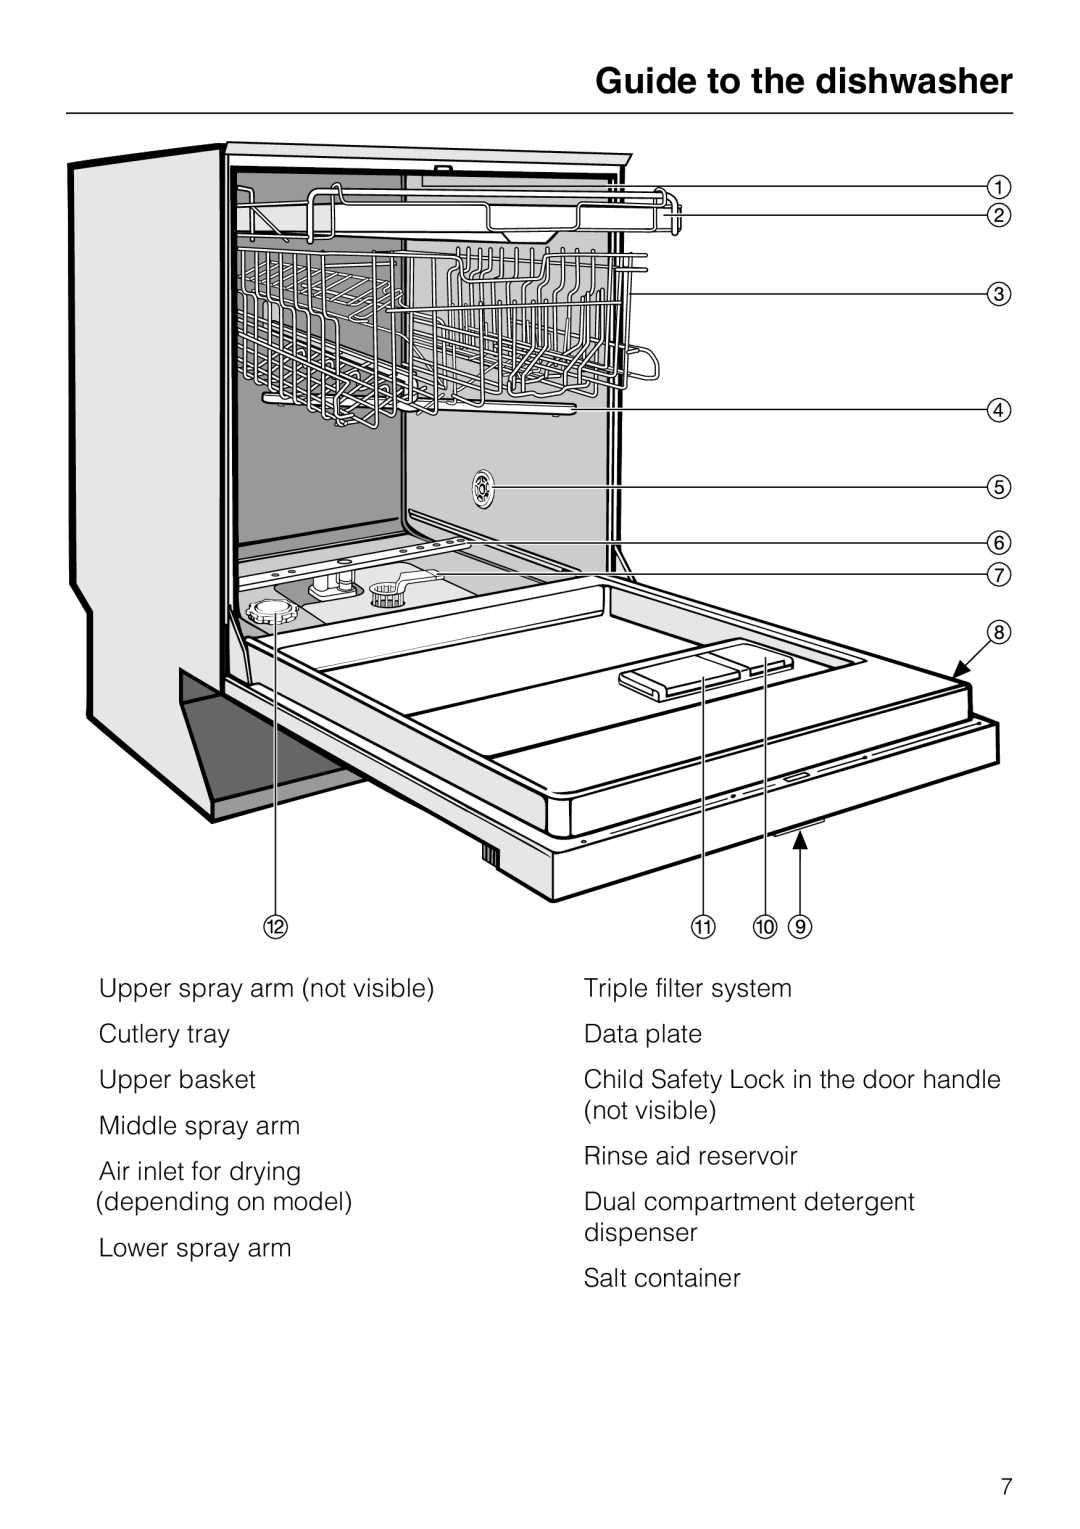 Miele G 4500 manual Guide to the dishwasher 